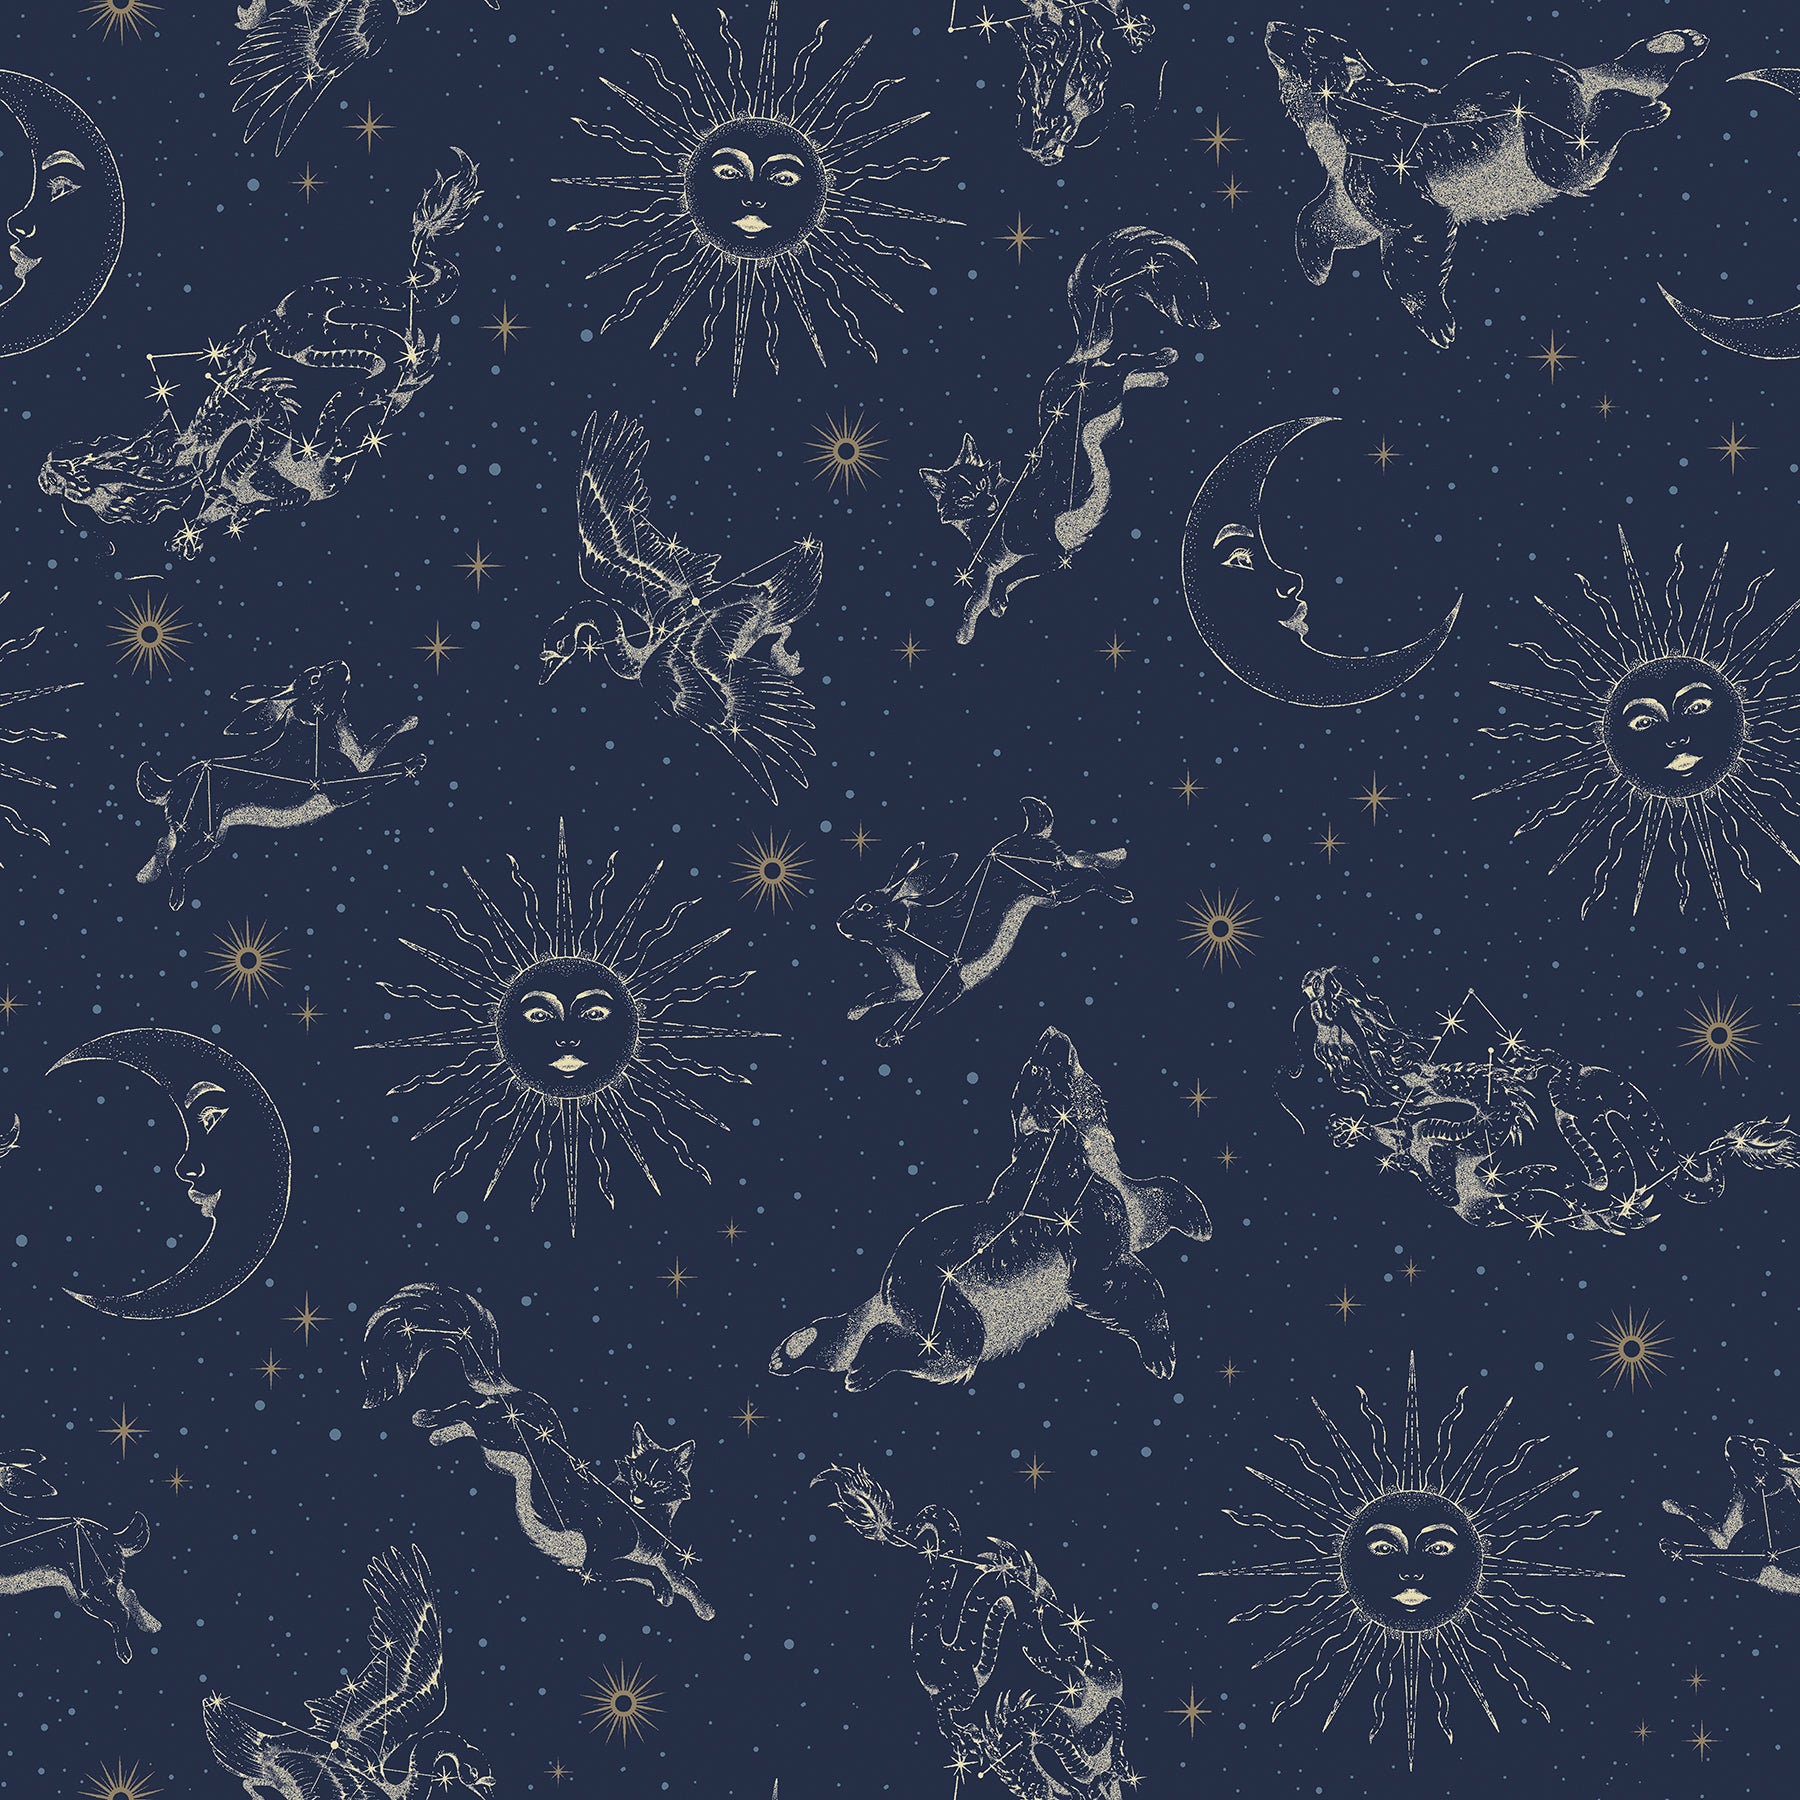 Zodiac Dreams Peel and Stick Wallpaper Peel and Stick Wallpaper RoomMates Roll Navy 